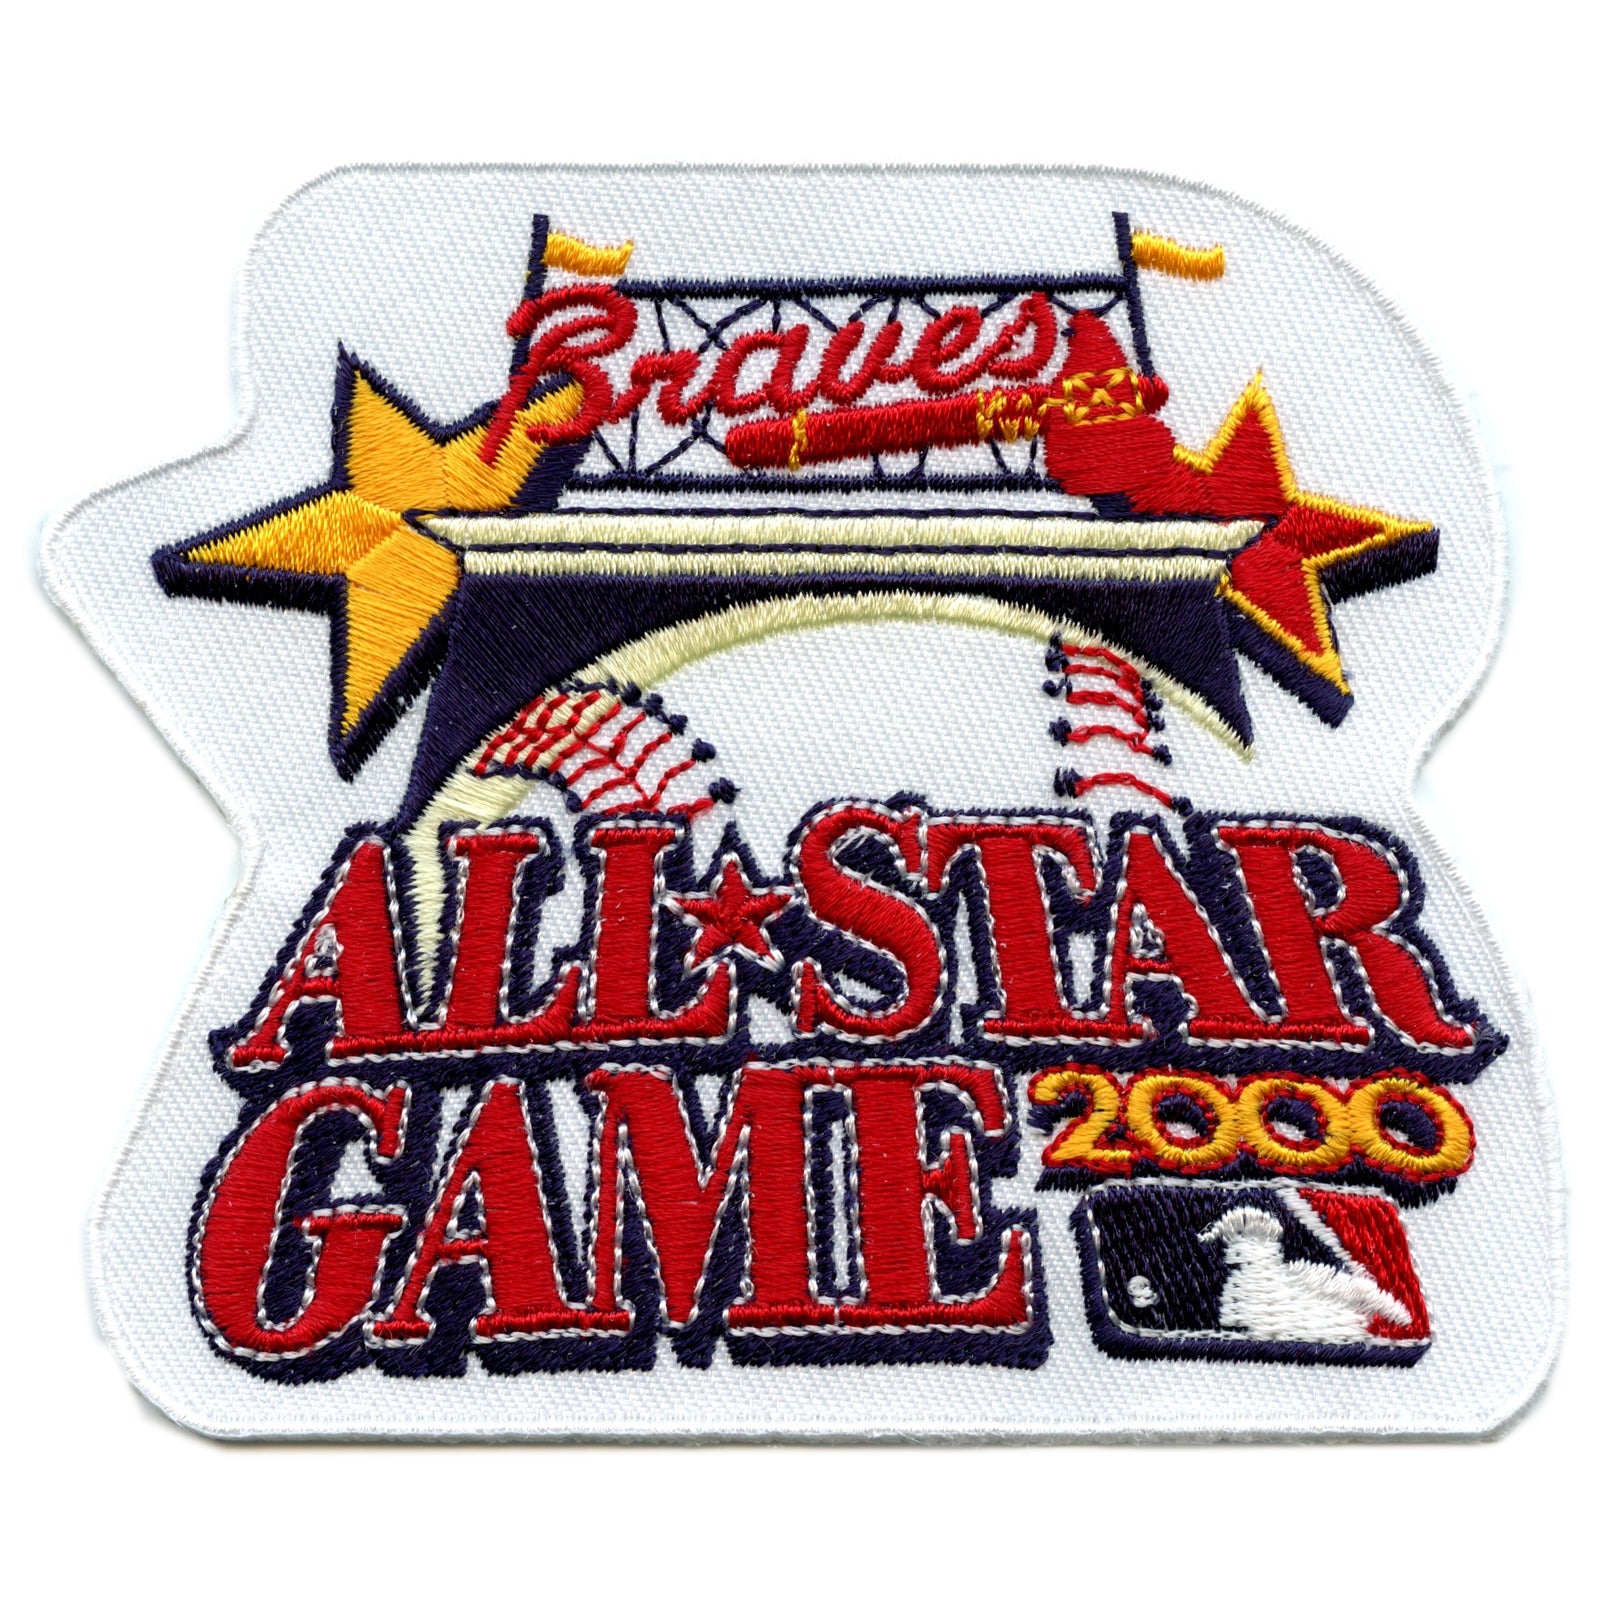 Patchwork: Braves cover All-Star logo on jerseys, shift hats